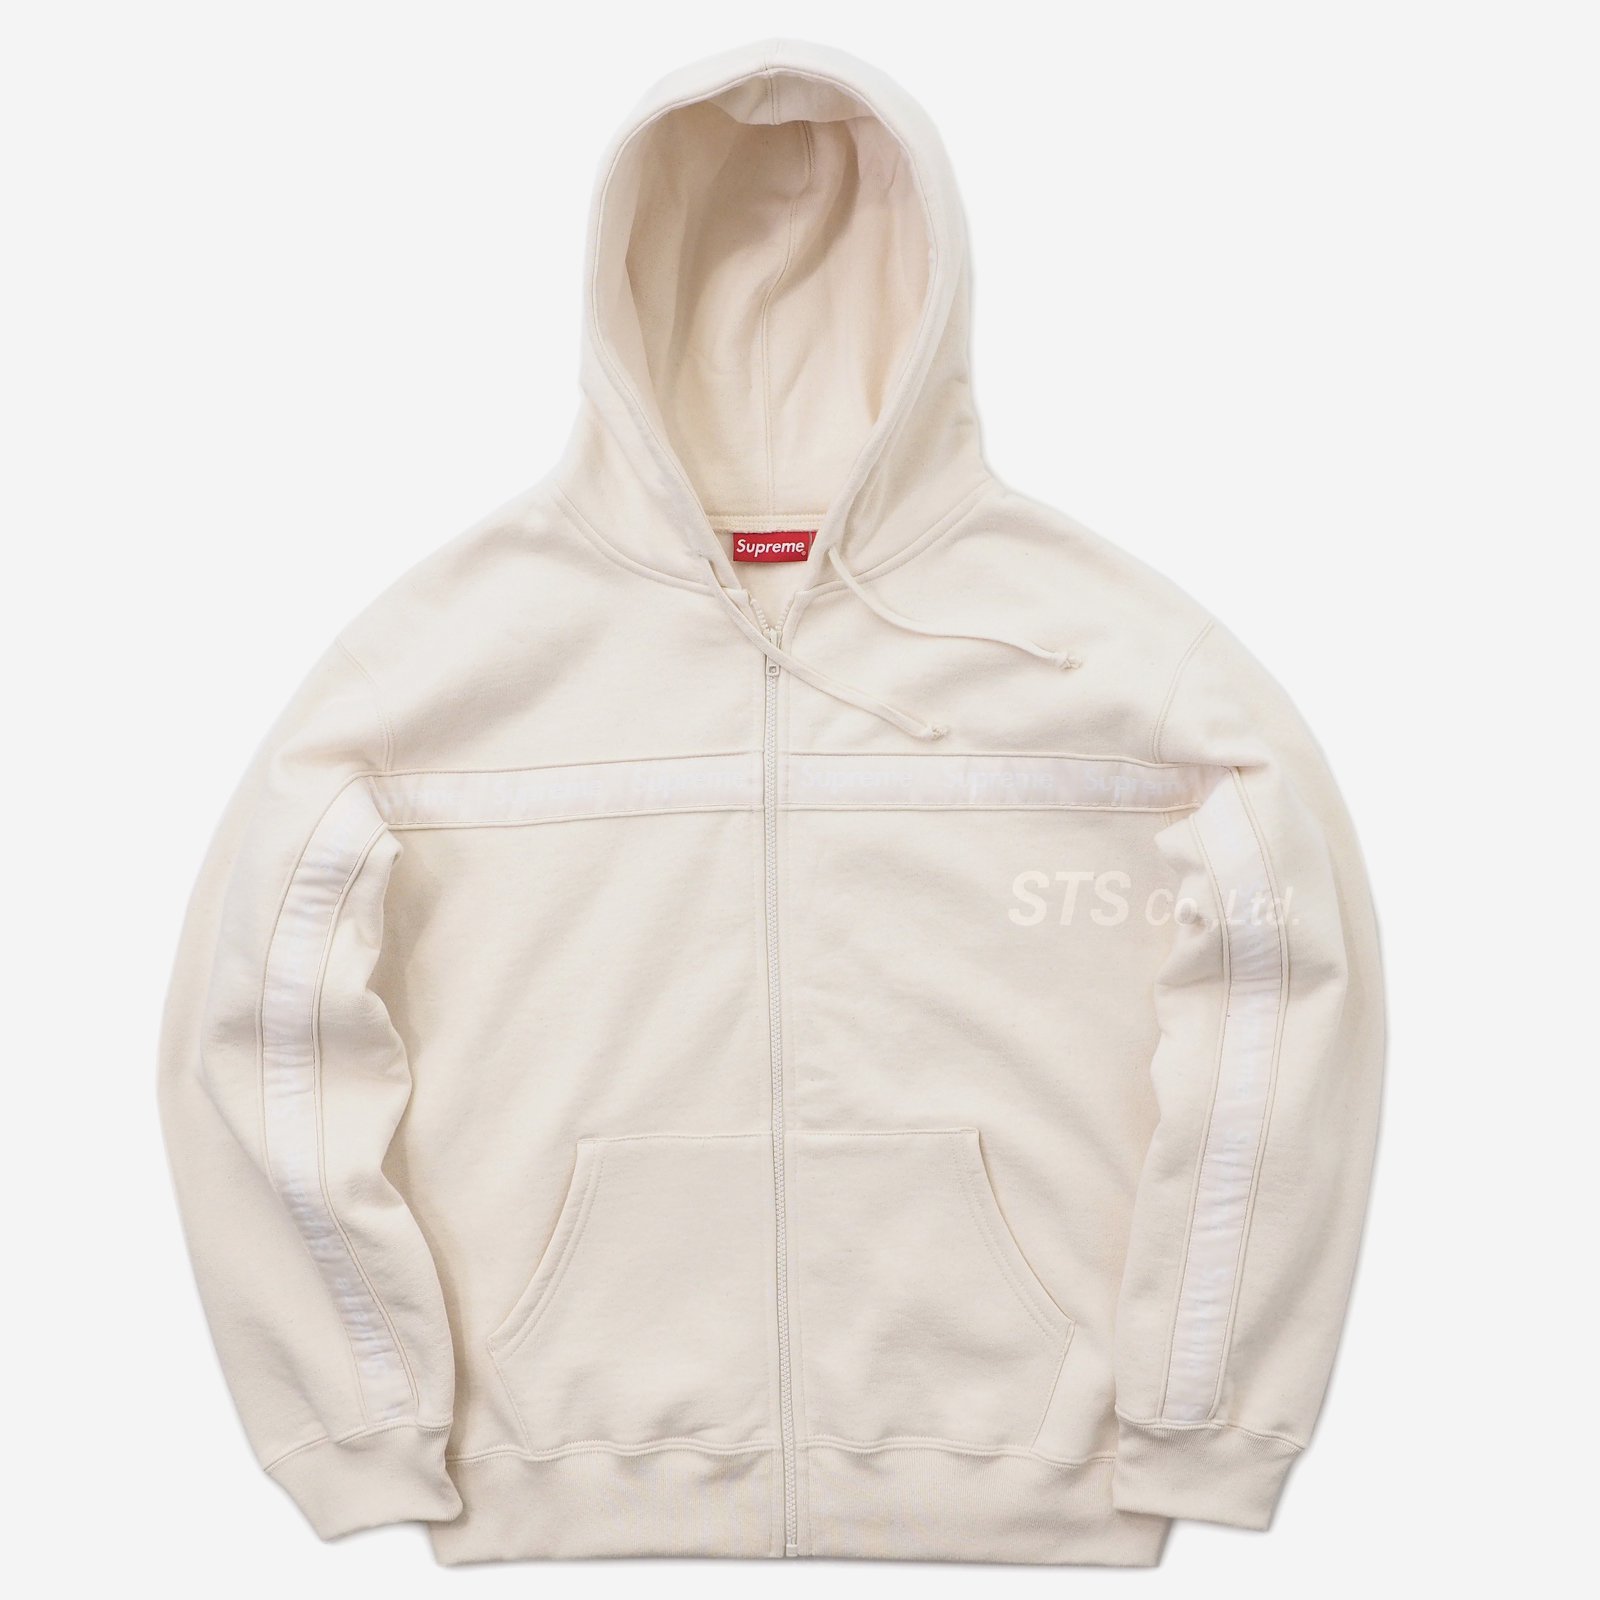 XL Supreme Text Stripe Zip Up Hooded